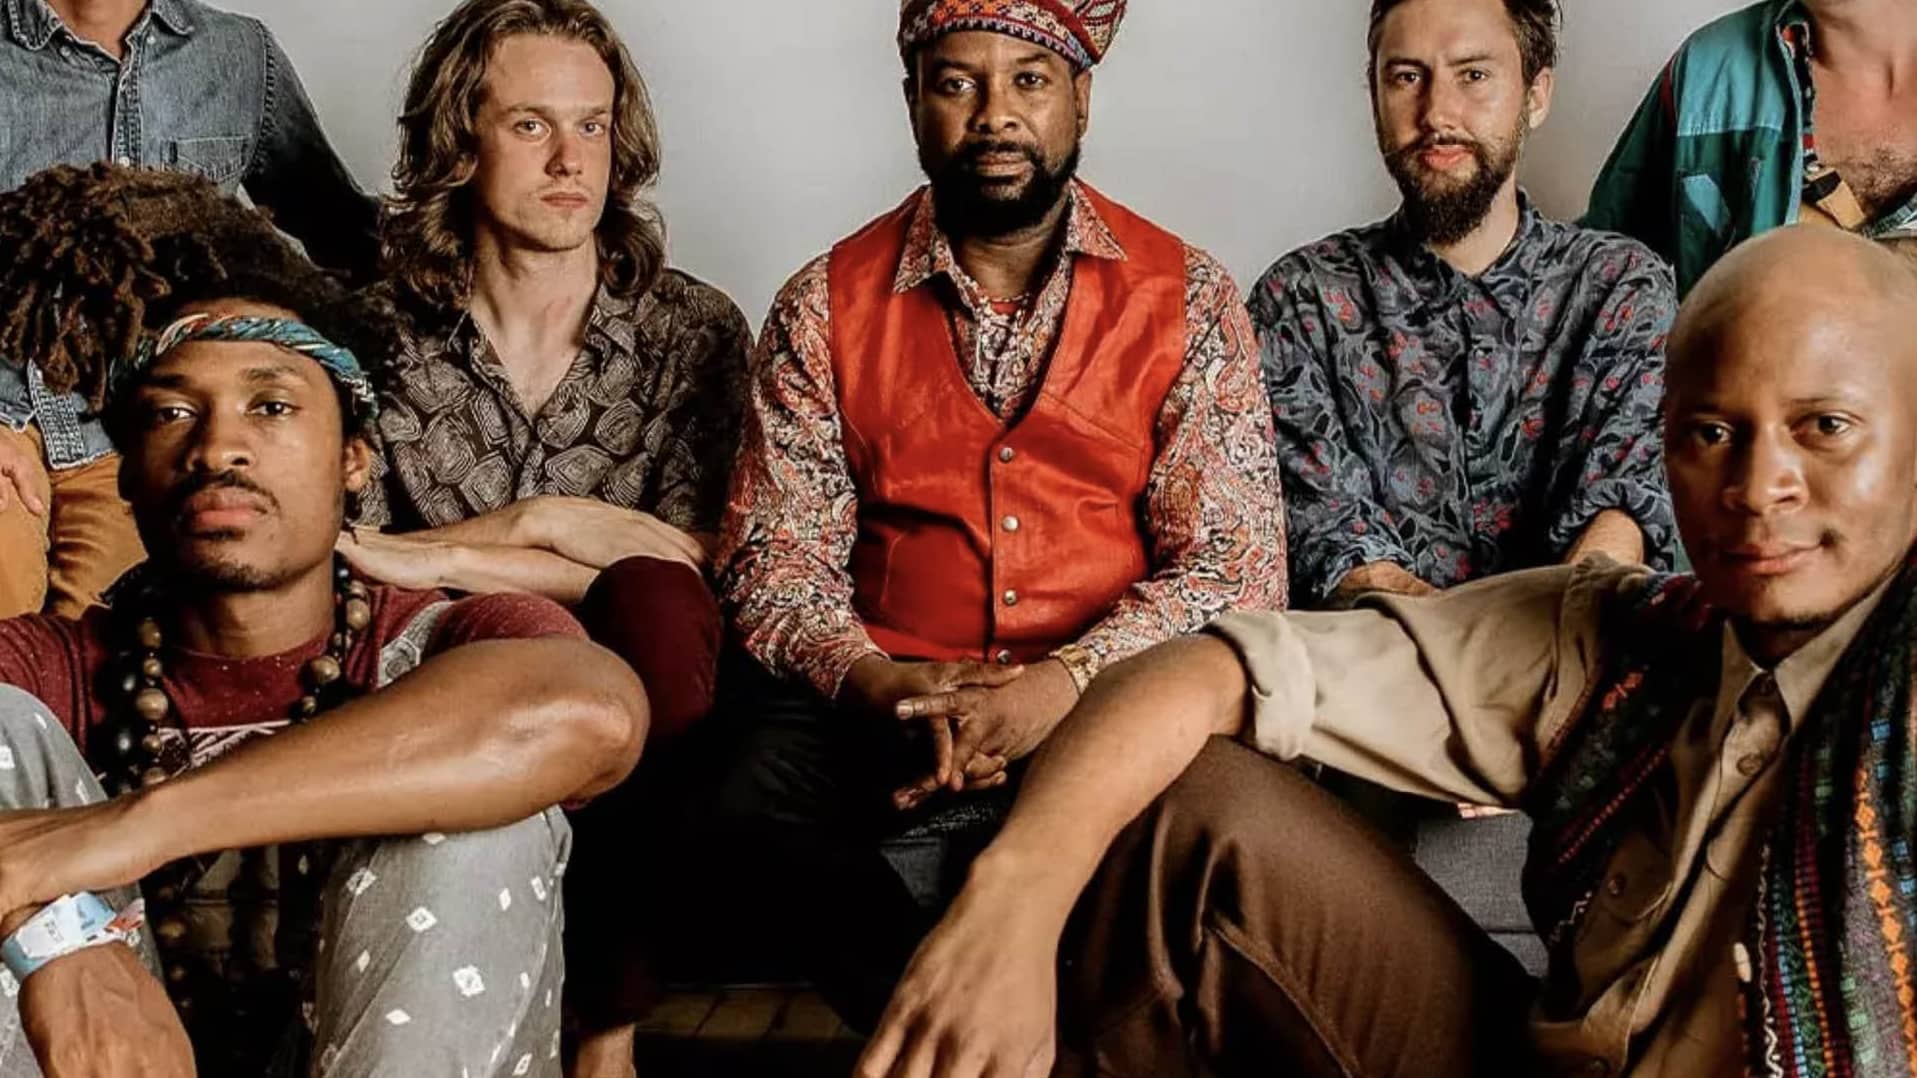 Brooklyn-based Super Yamba Band ignites one of the hottest Afro-funk dance parties in town with the legendary Kaleta